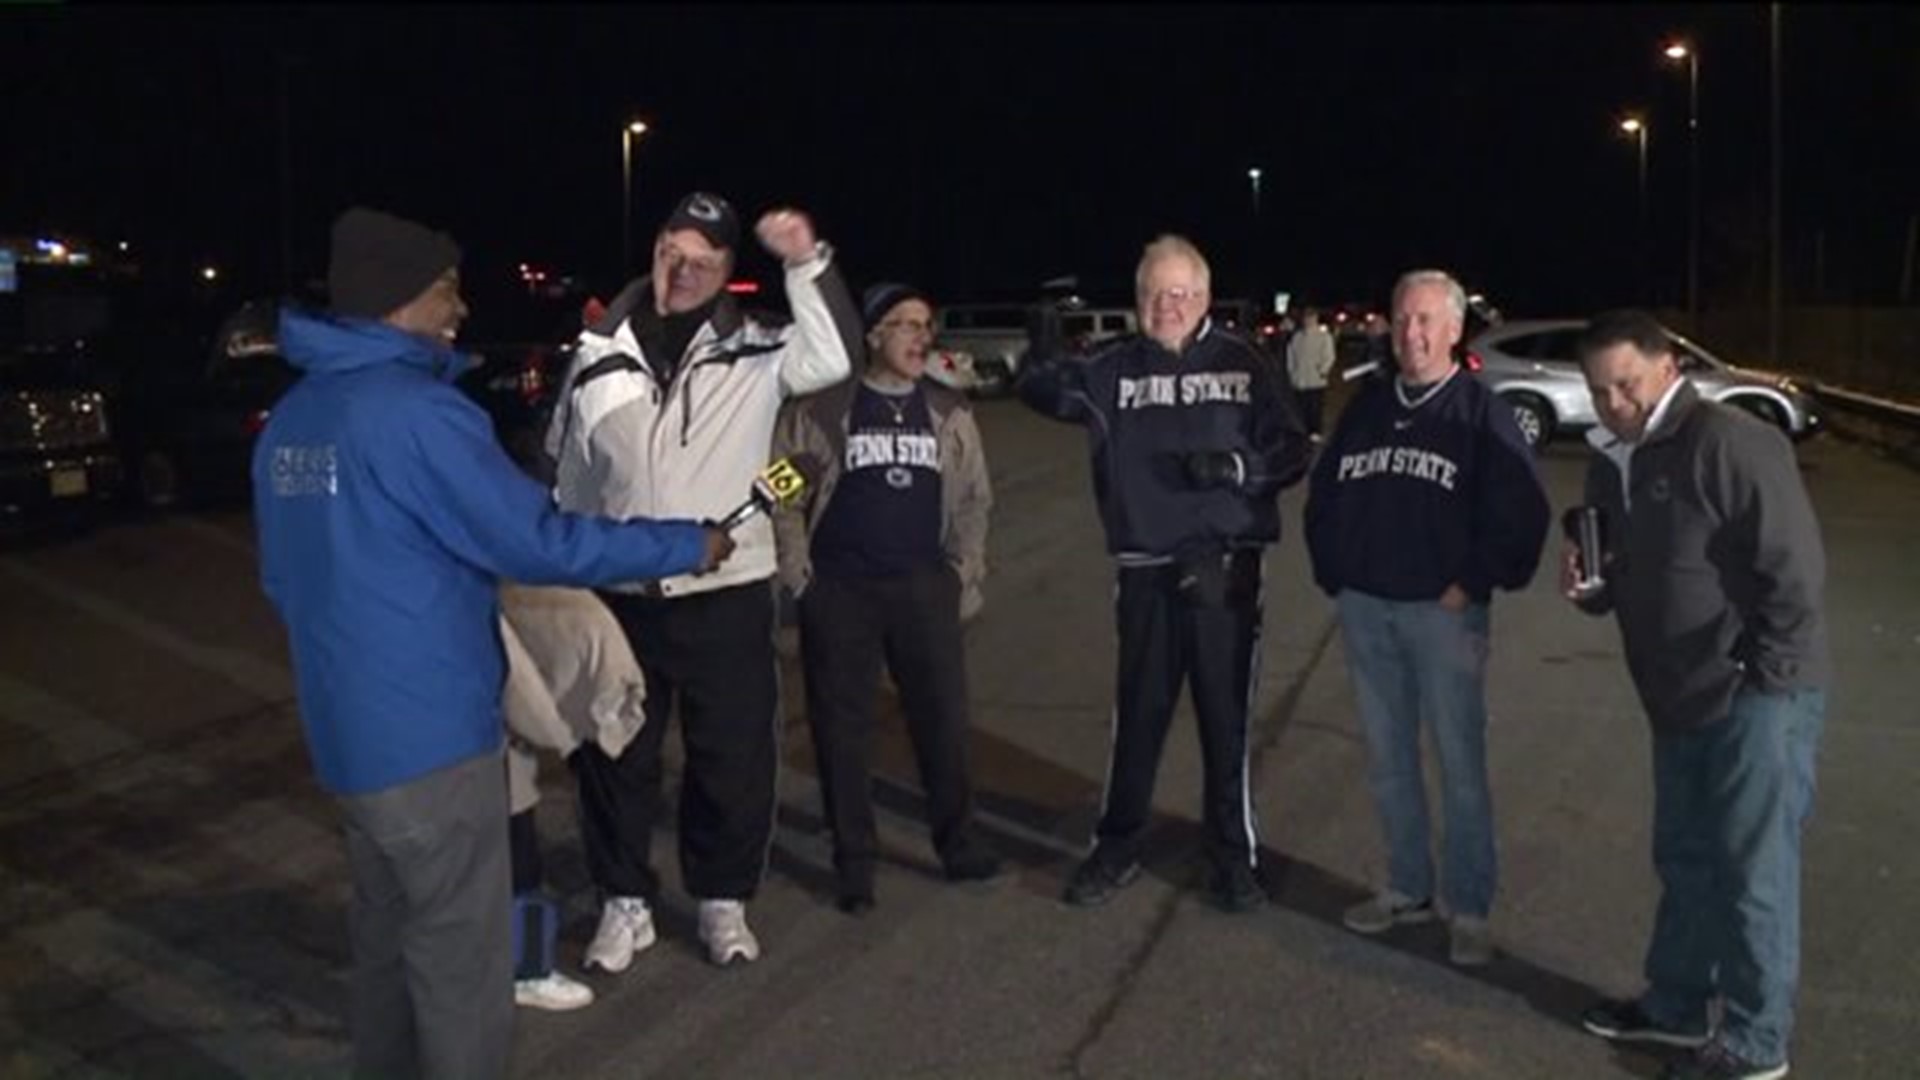 Penn State Fans Hitting the Road to Championship Game